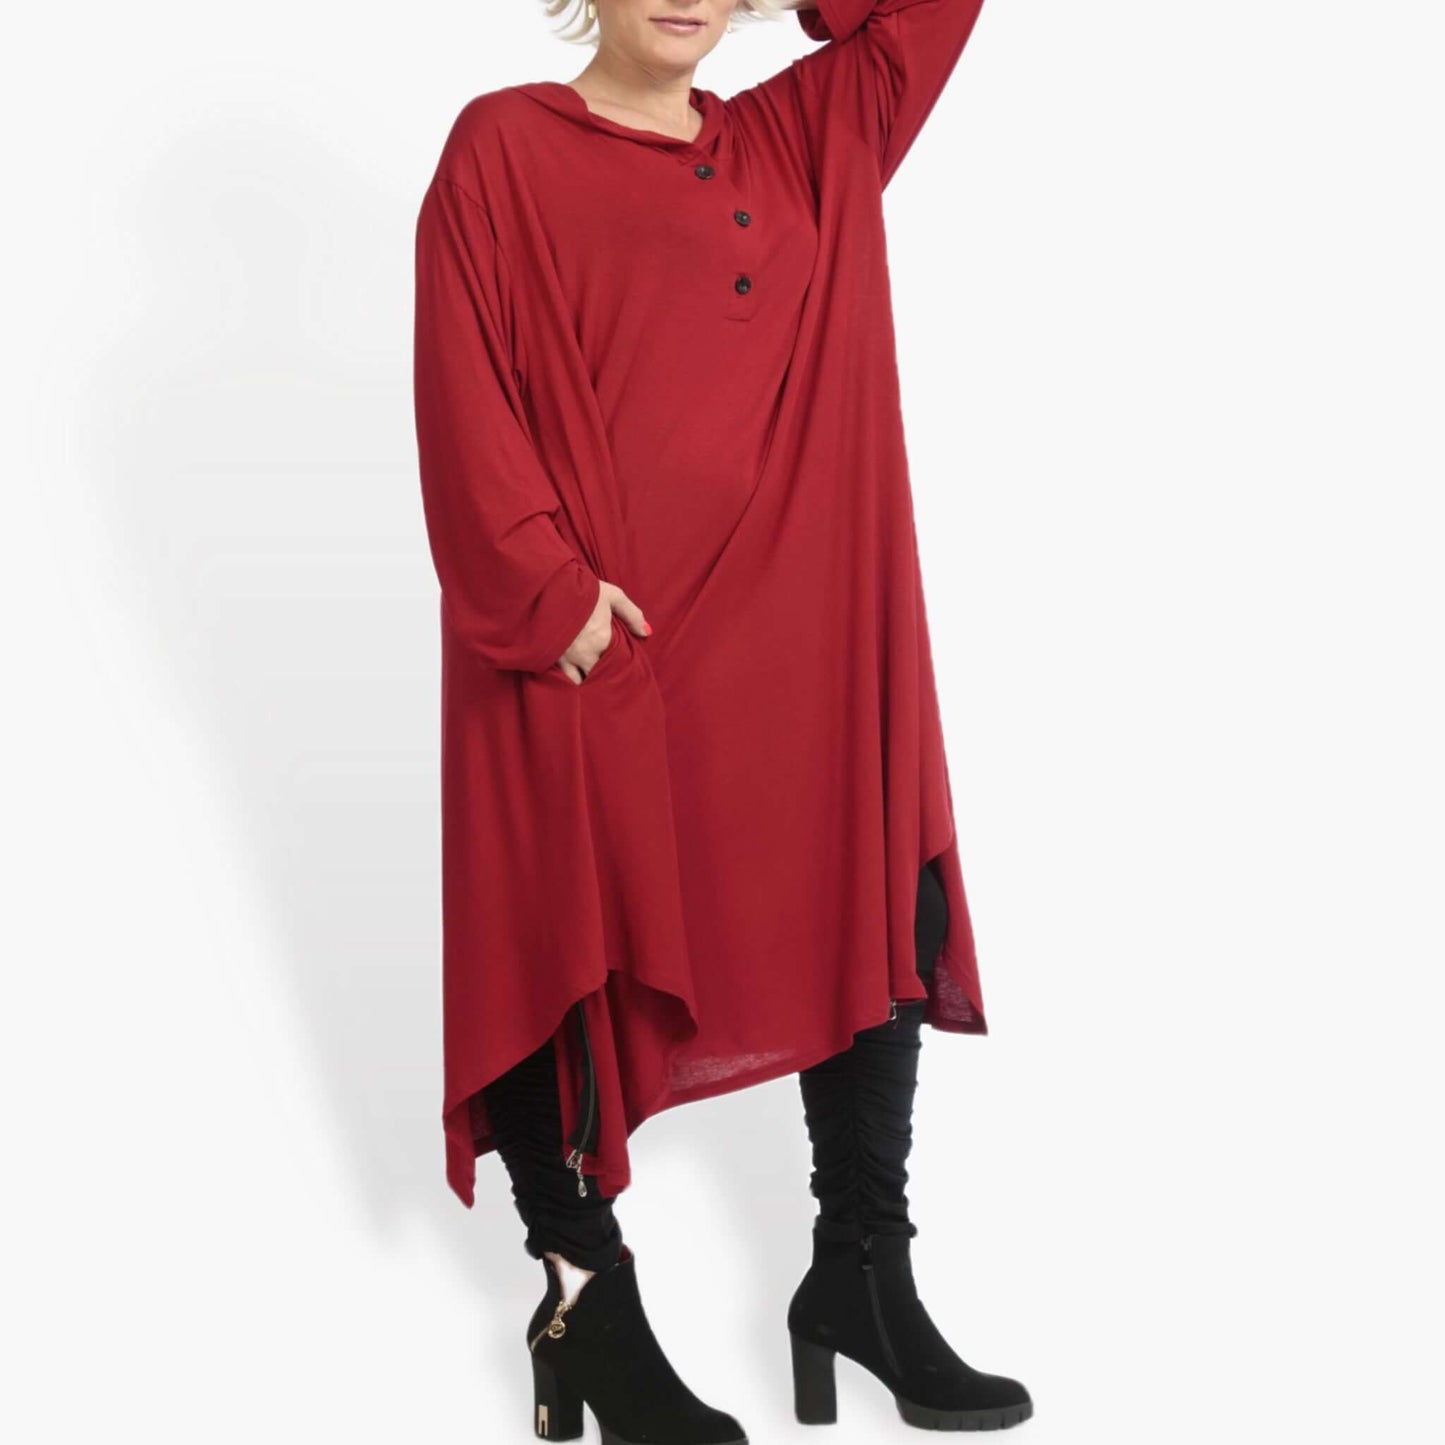 Everyday dress in A-shape made of fine jersey quality, viscose basics in red